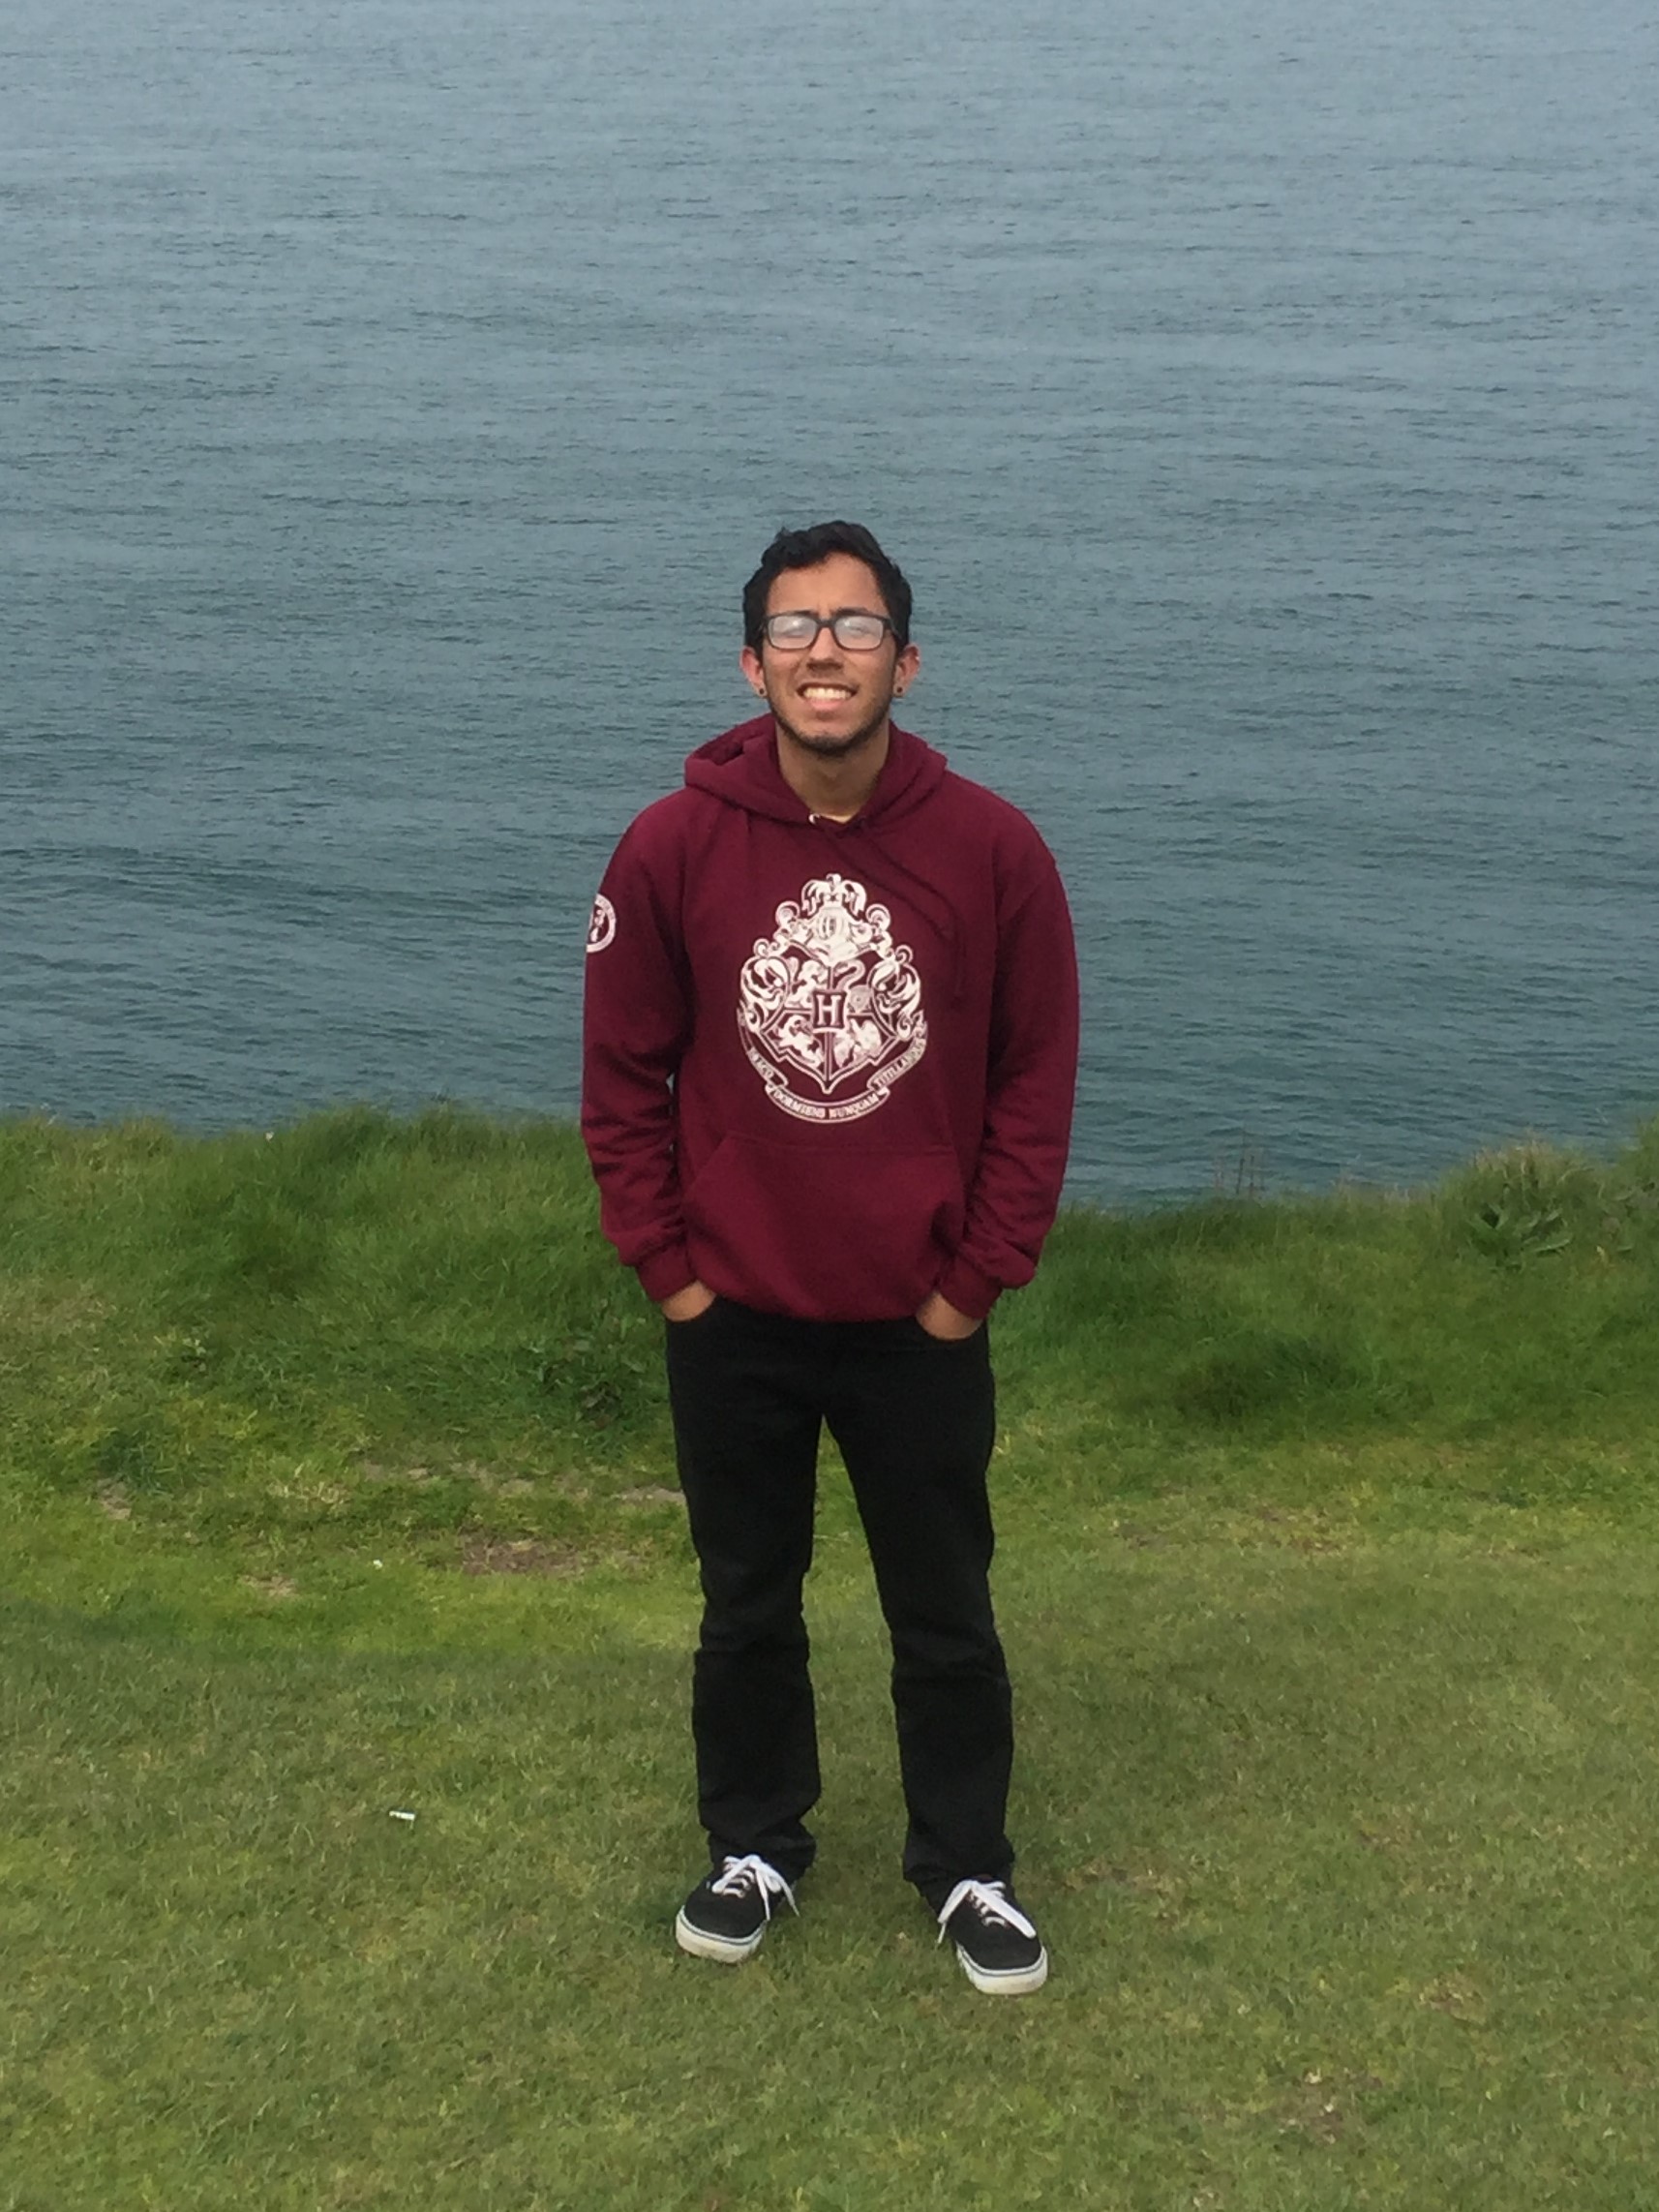 Michael Duarte on the Island of Carrickarede after crossing the rope bridge